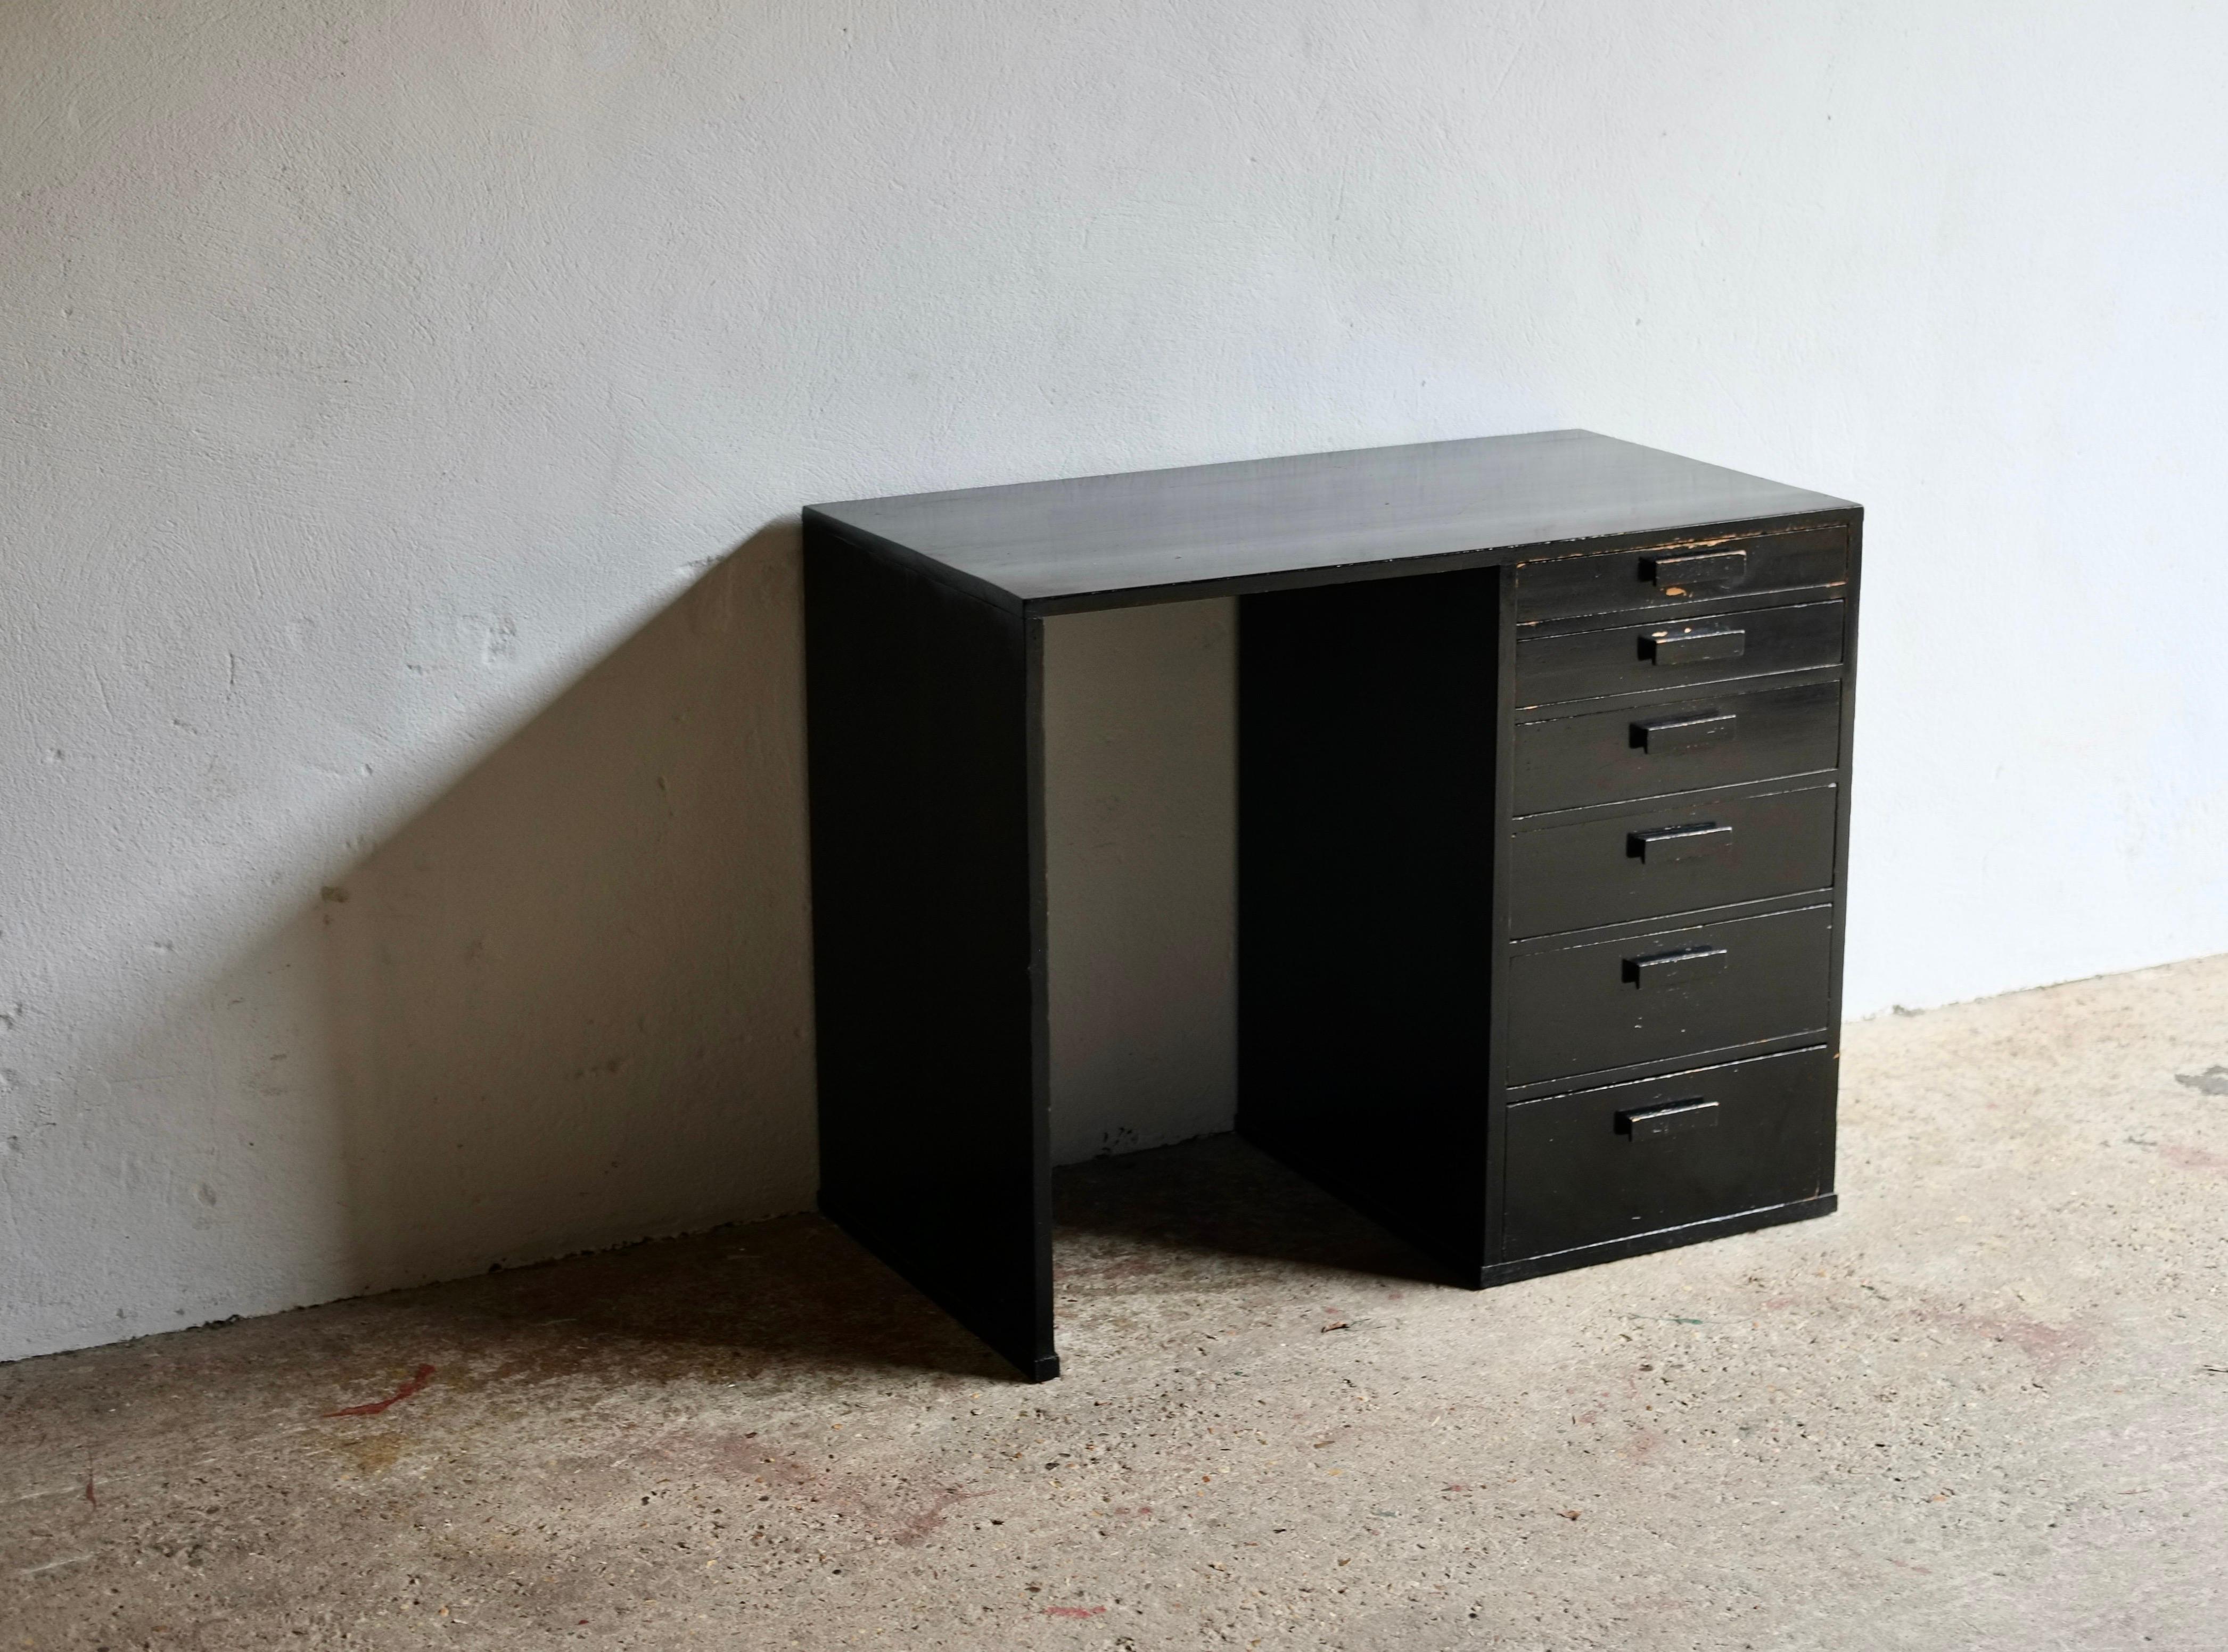 A most beautifully proportioned ebonised early to Mid-20th Century modernist desk. 

Featuring six varying sized drawers the desk is in good vintage condition with light wear to the paintwork. 

From the collection of window dresser, clothing